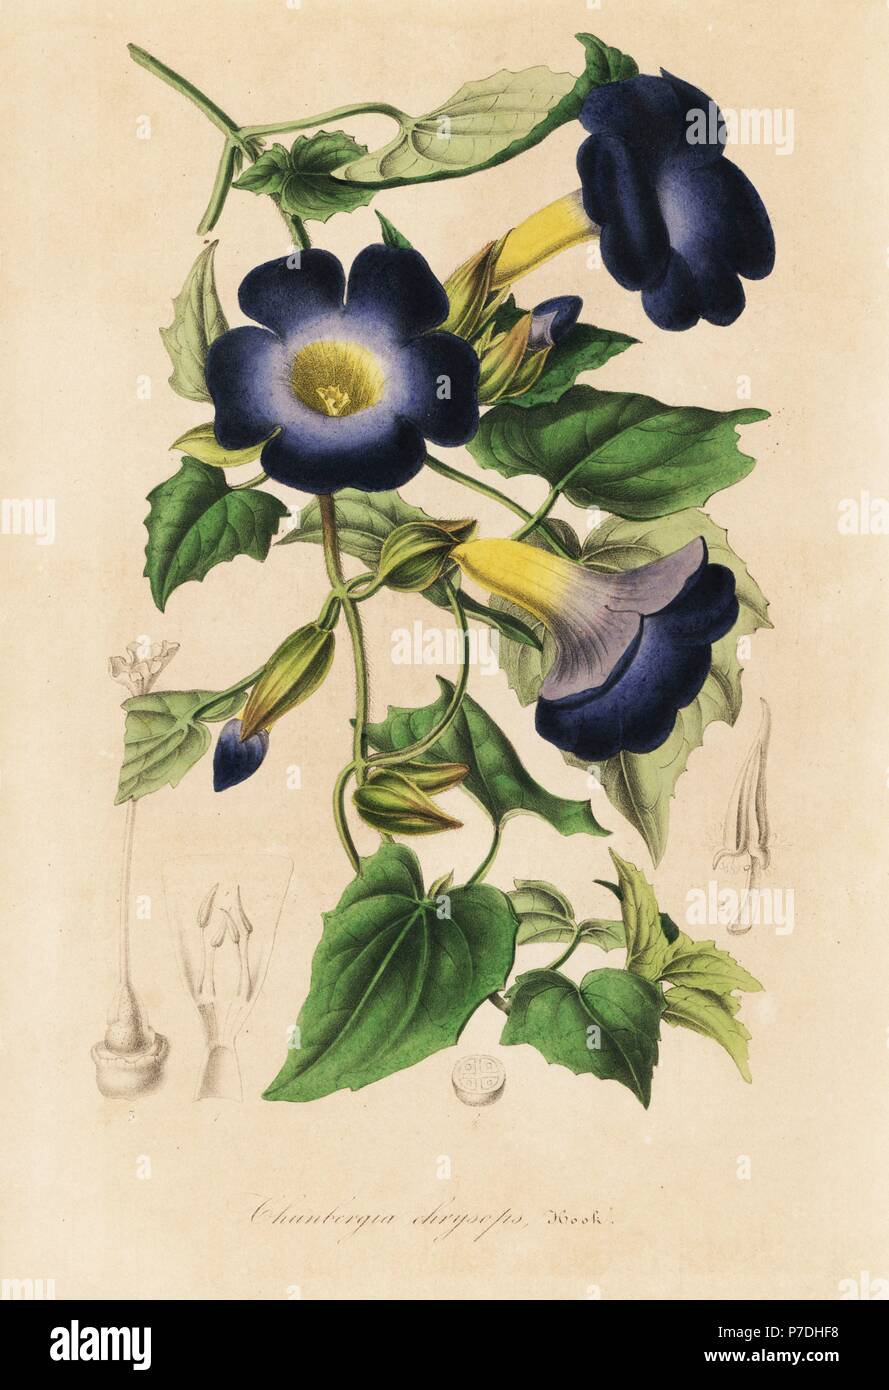 Thunbergia chrysops. Handcoloured lithograph from Louis van Houtte and Charles Lemaire's Flowers of the Gardens and Hothouses of Europe, Flore des Serres et des Jardins de l'Europe, Ghent, Belgium, 1845. Stock Photo